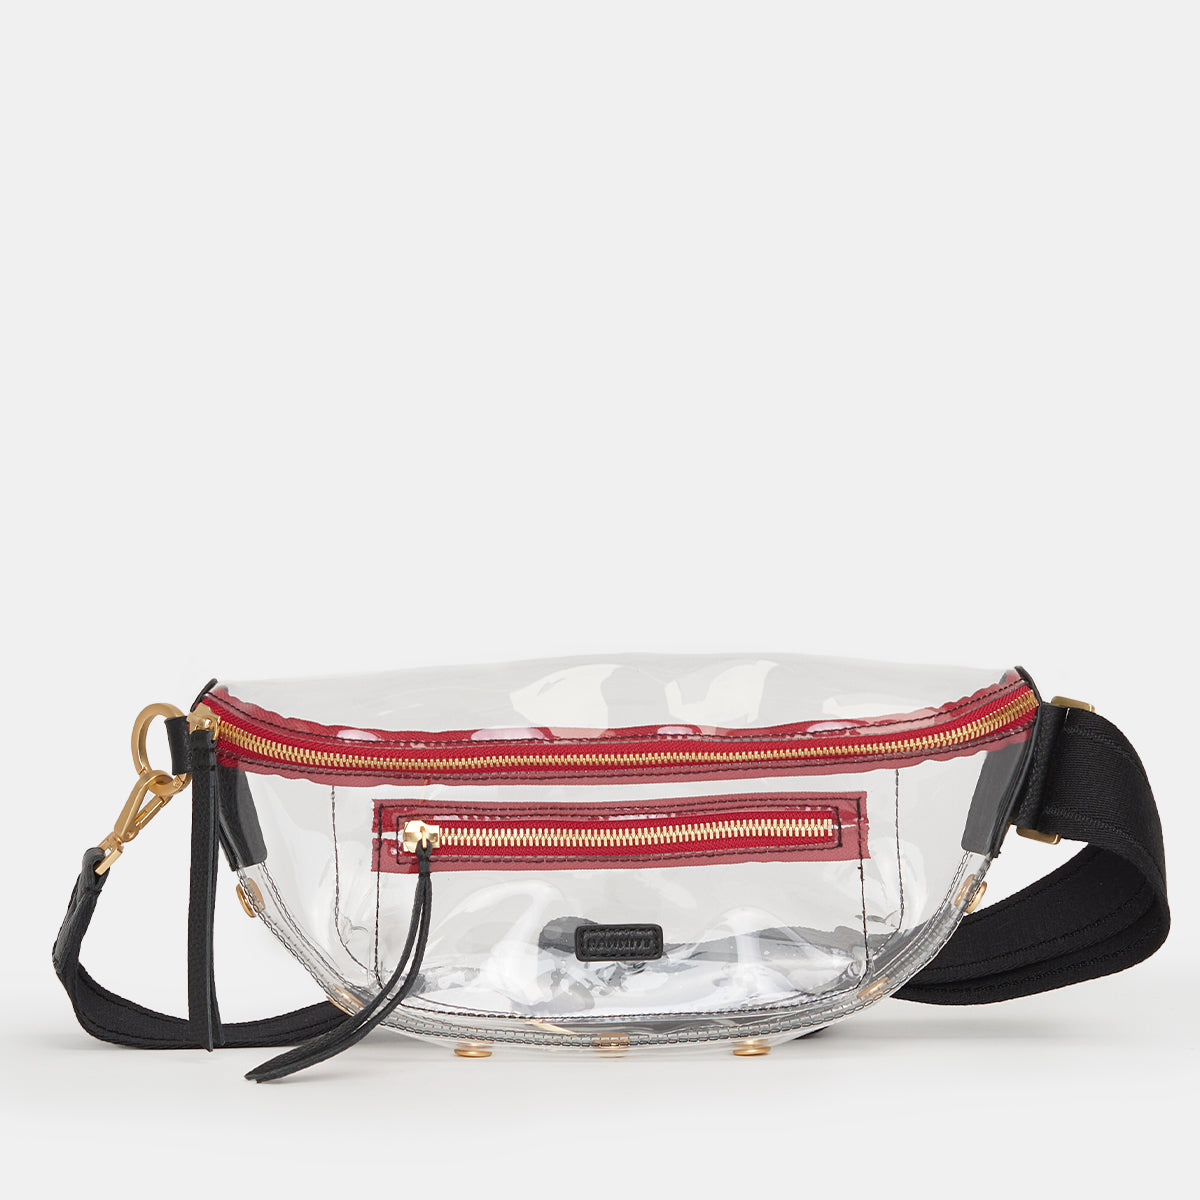 Charles-Crossbody-Clear-Black-BG-Red-Zip-Front-View